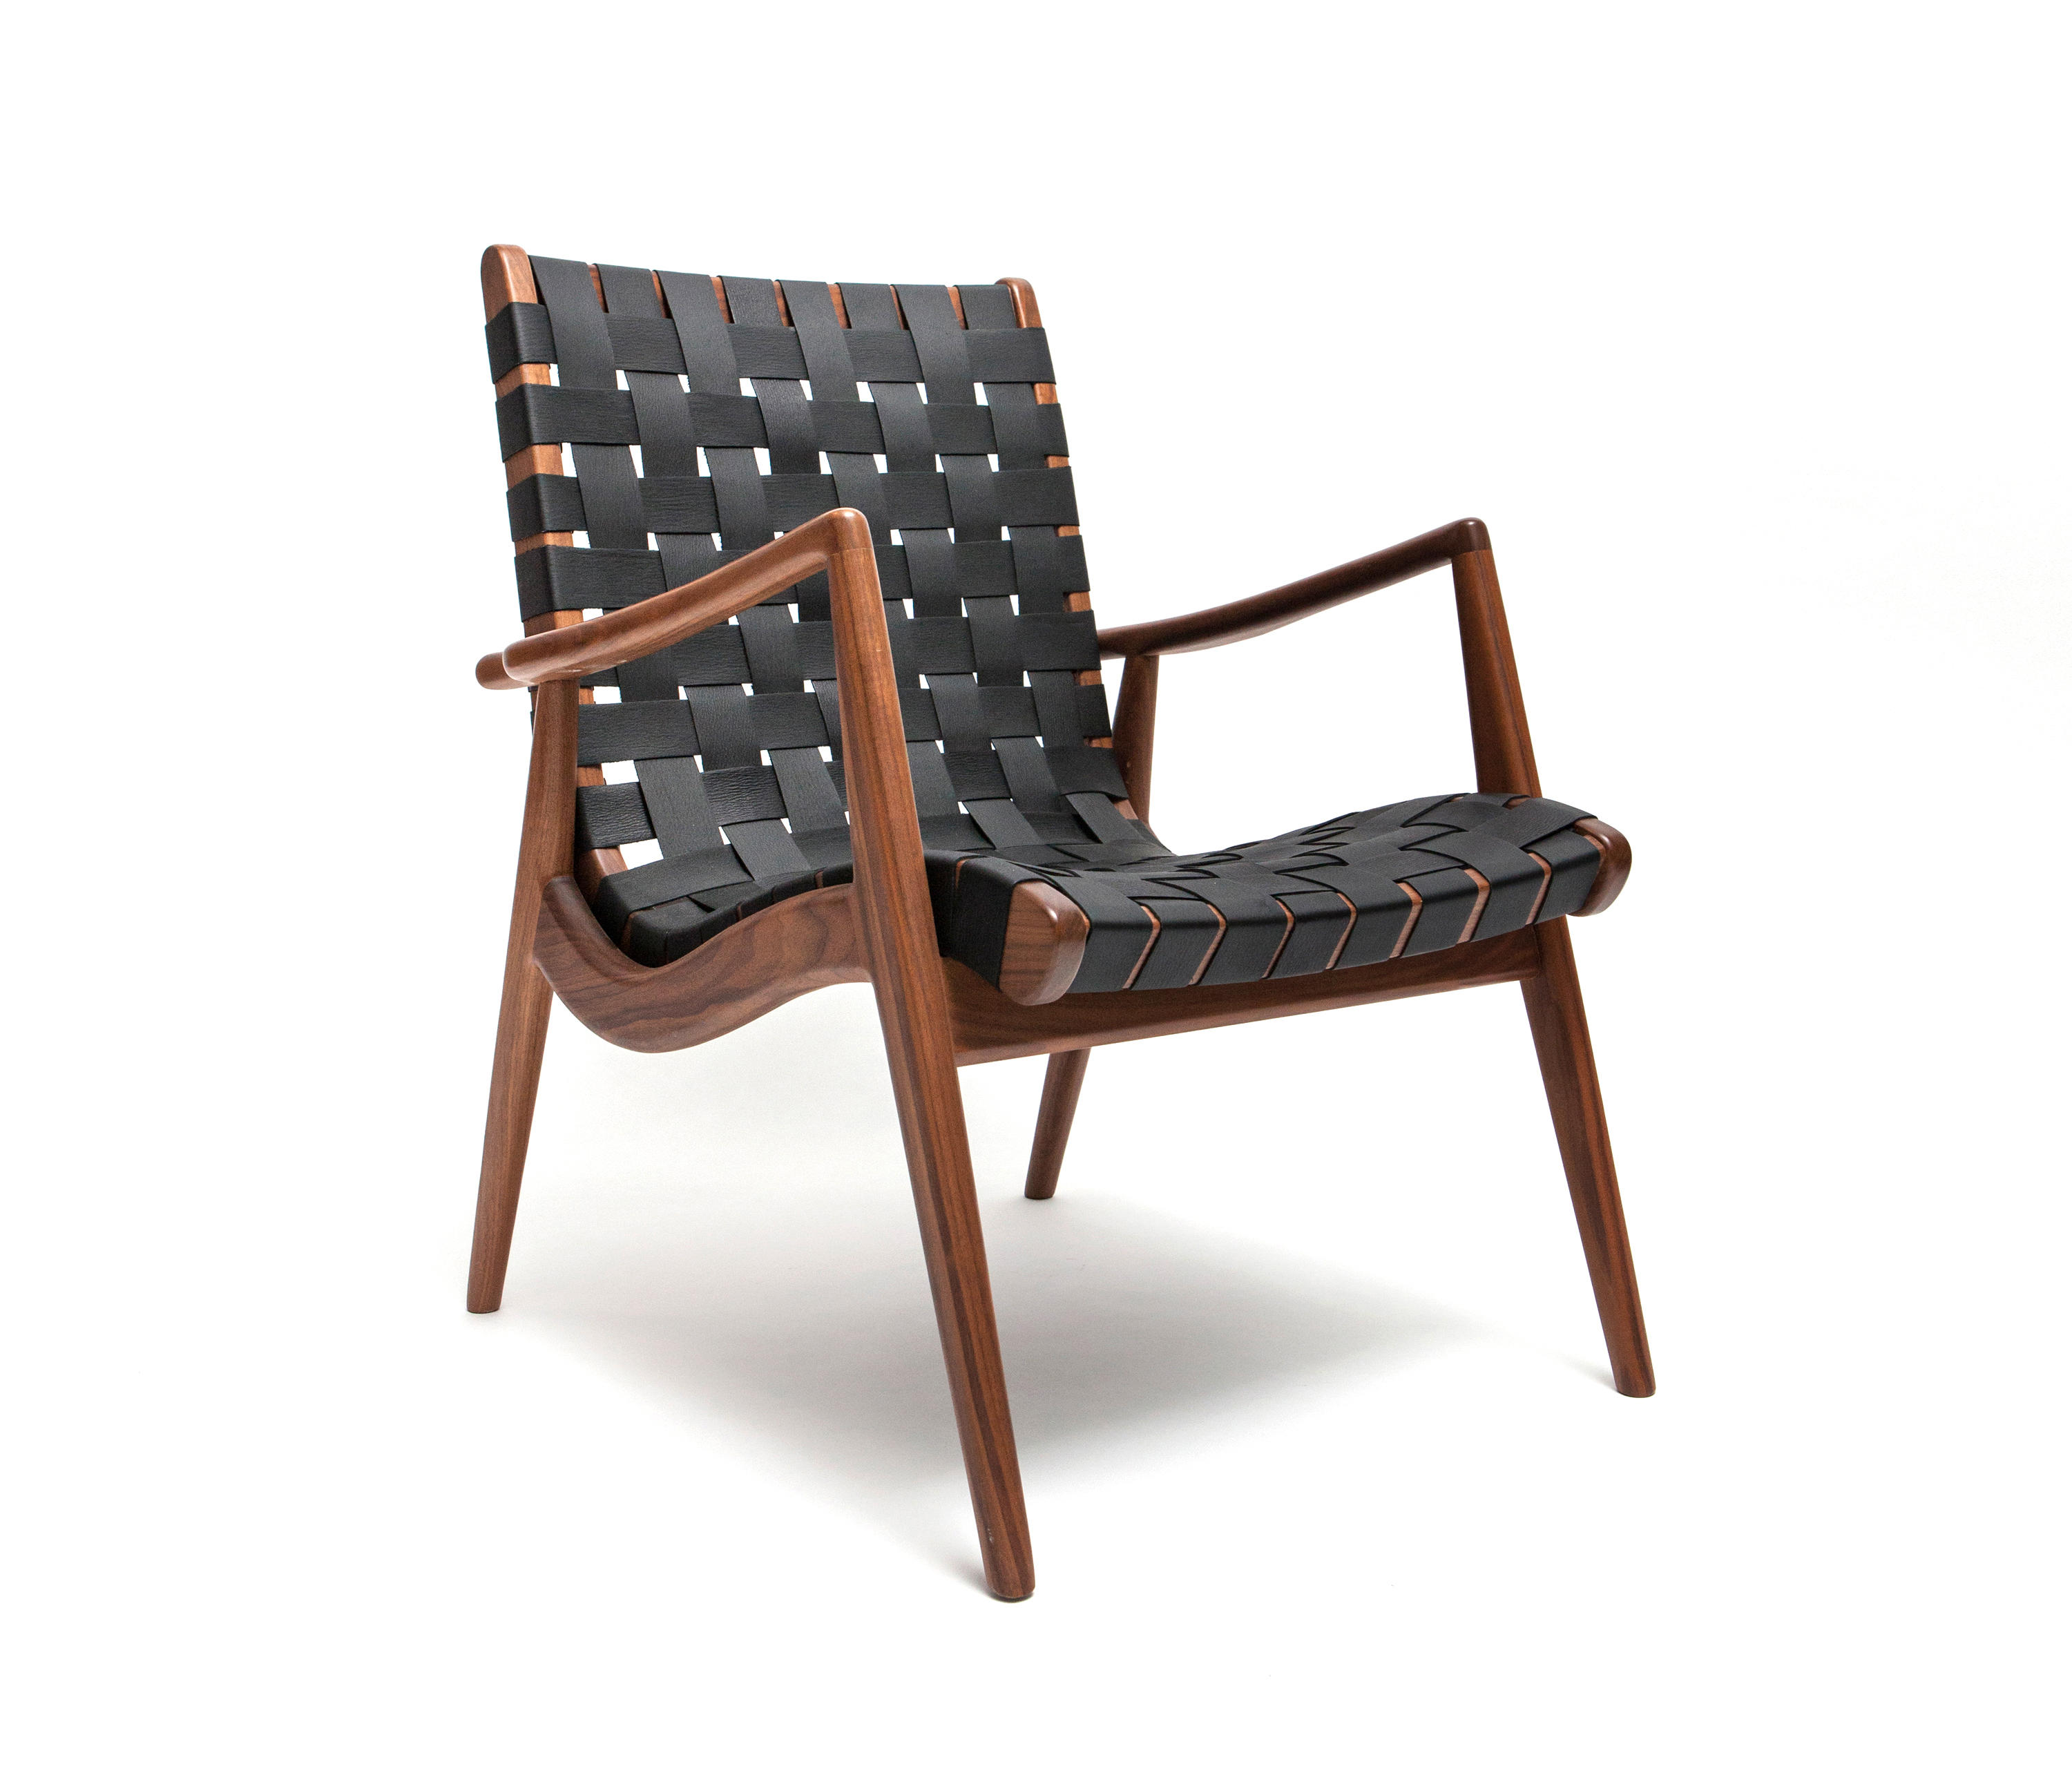 Woven Leather Armchair & designer furniture | Architonic